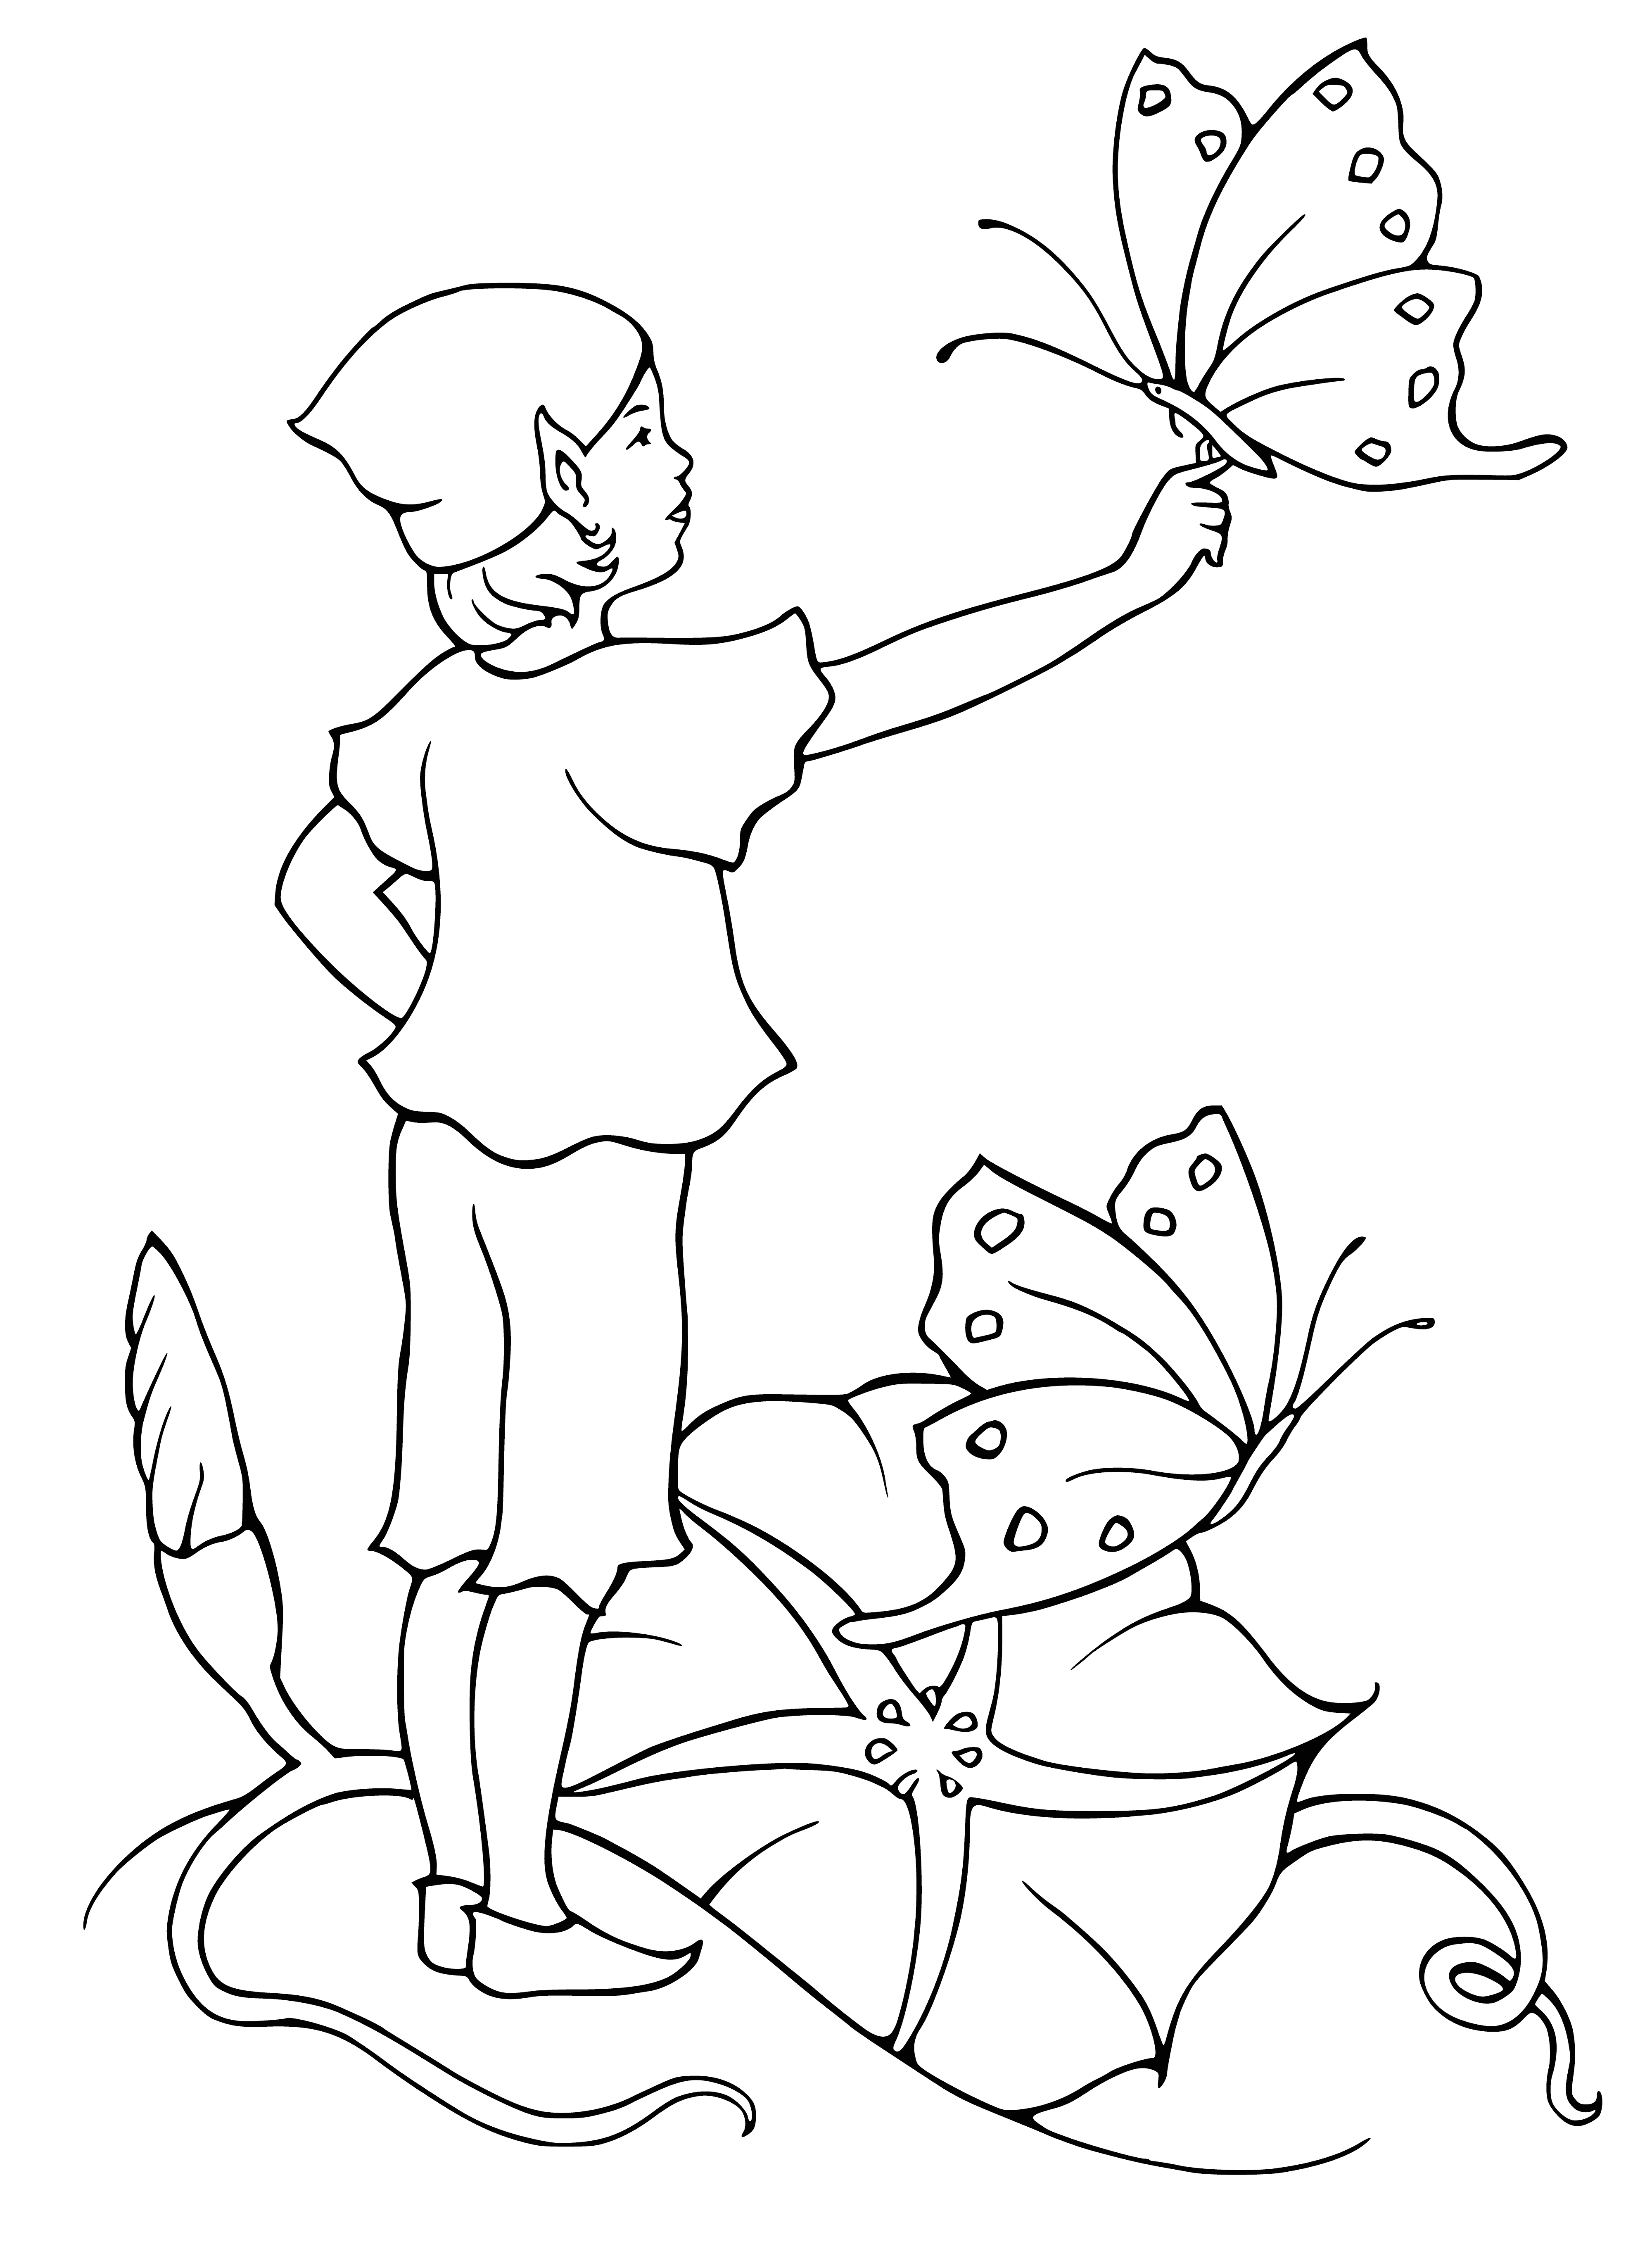 coloring page: Elf enjoying butterflies in a field of flowers, dressed in light blue dress with white accents. Serenity radiates from her expression.